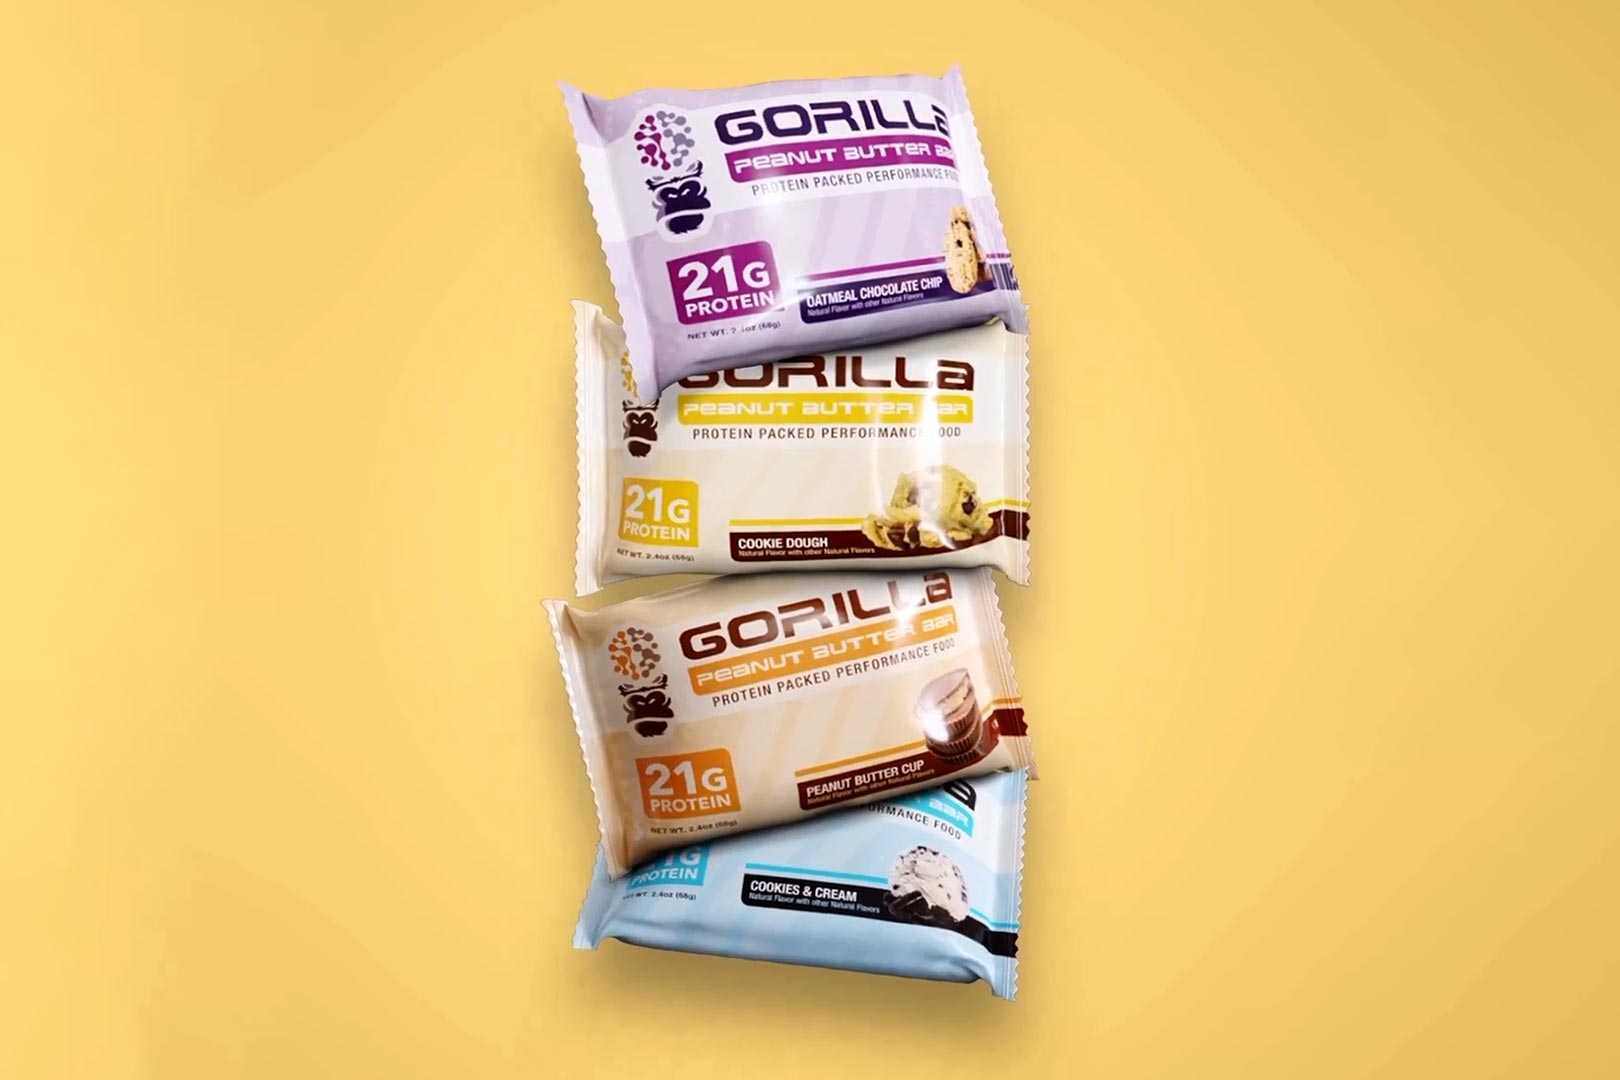 Peanut butter-based bar coming to Gorilla Mind in four flavors with 21g of protein